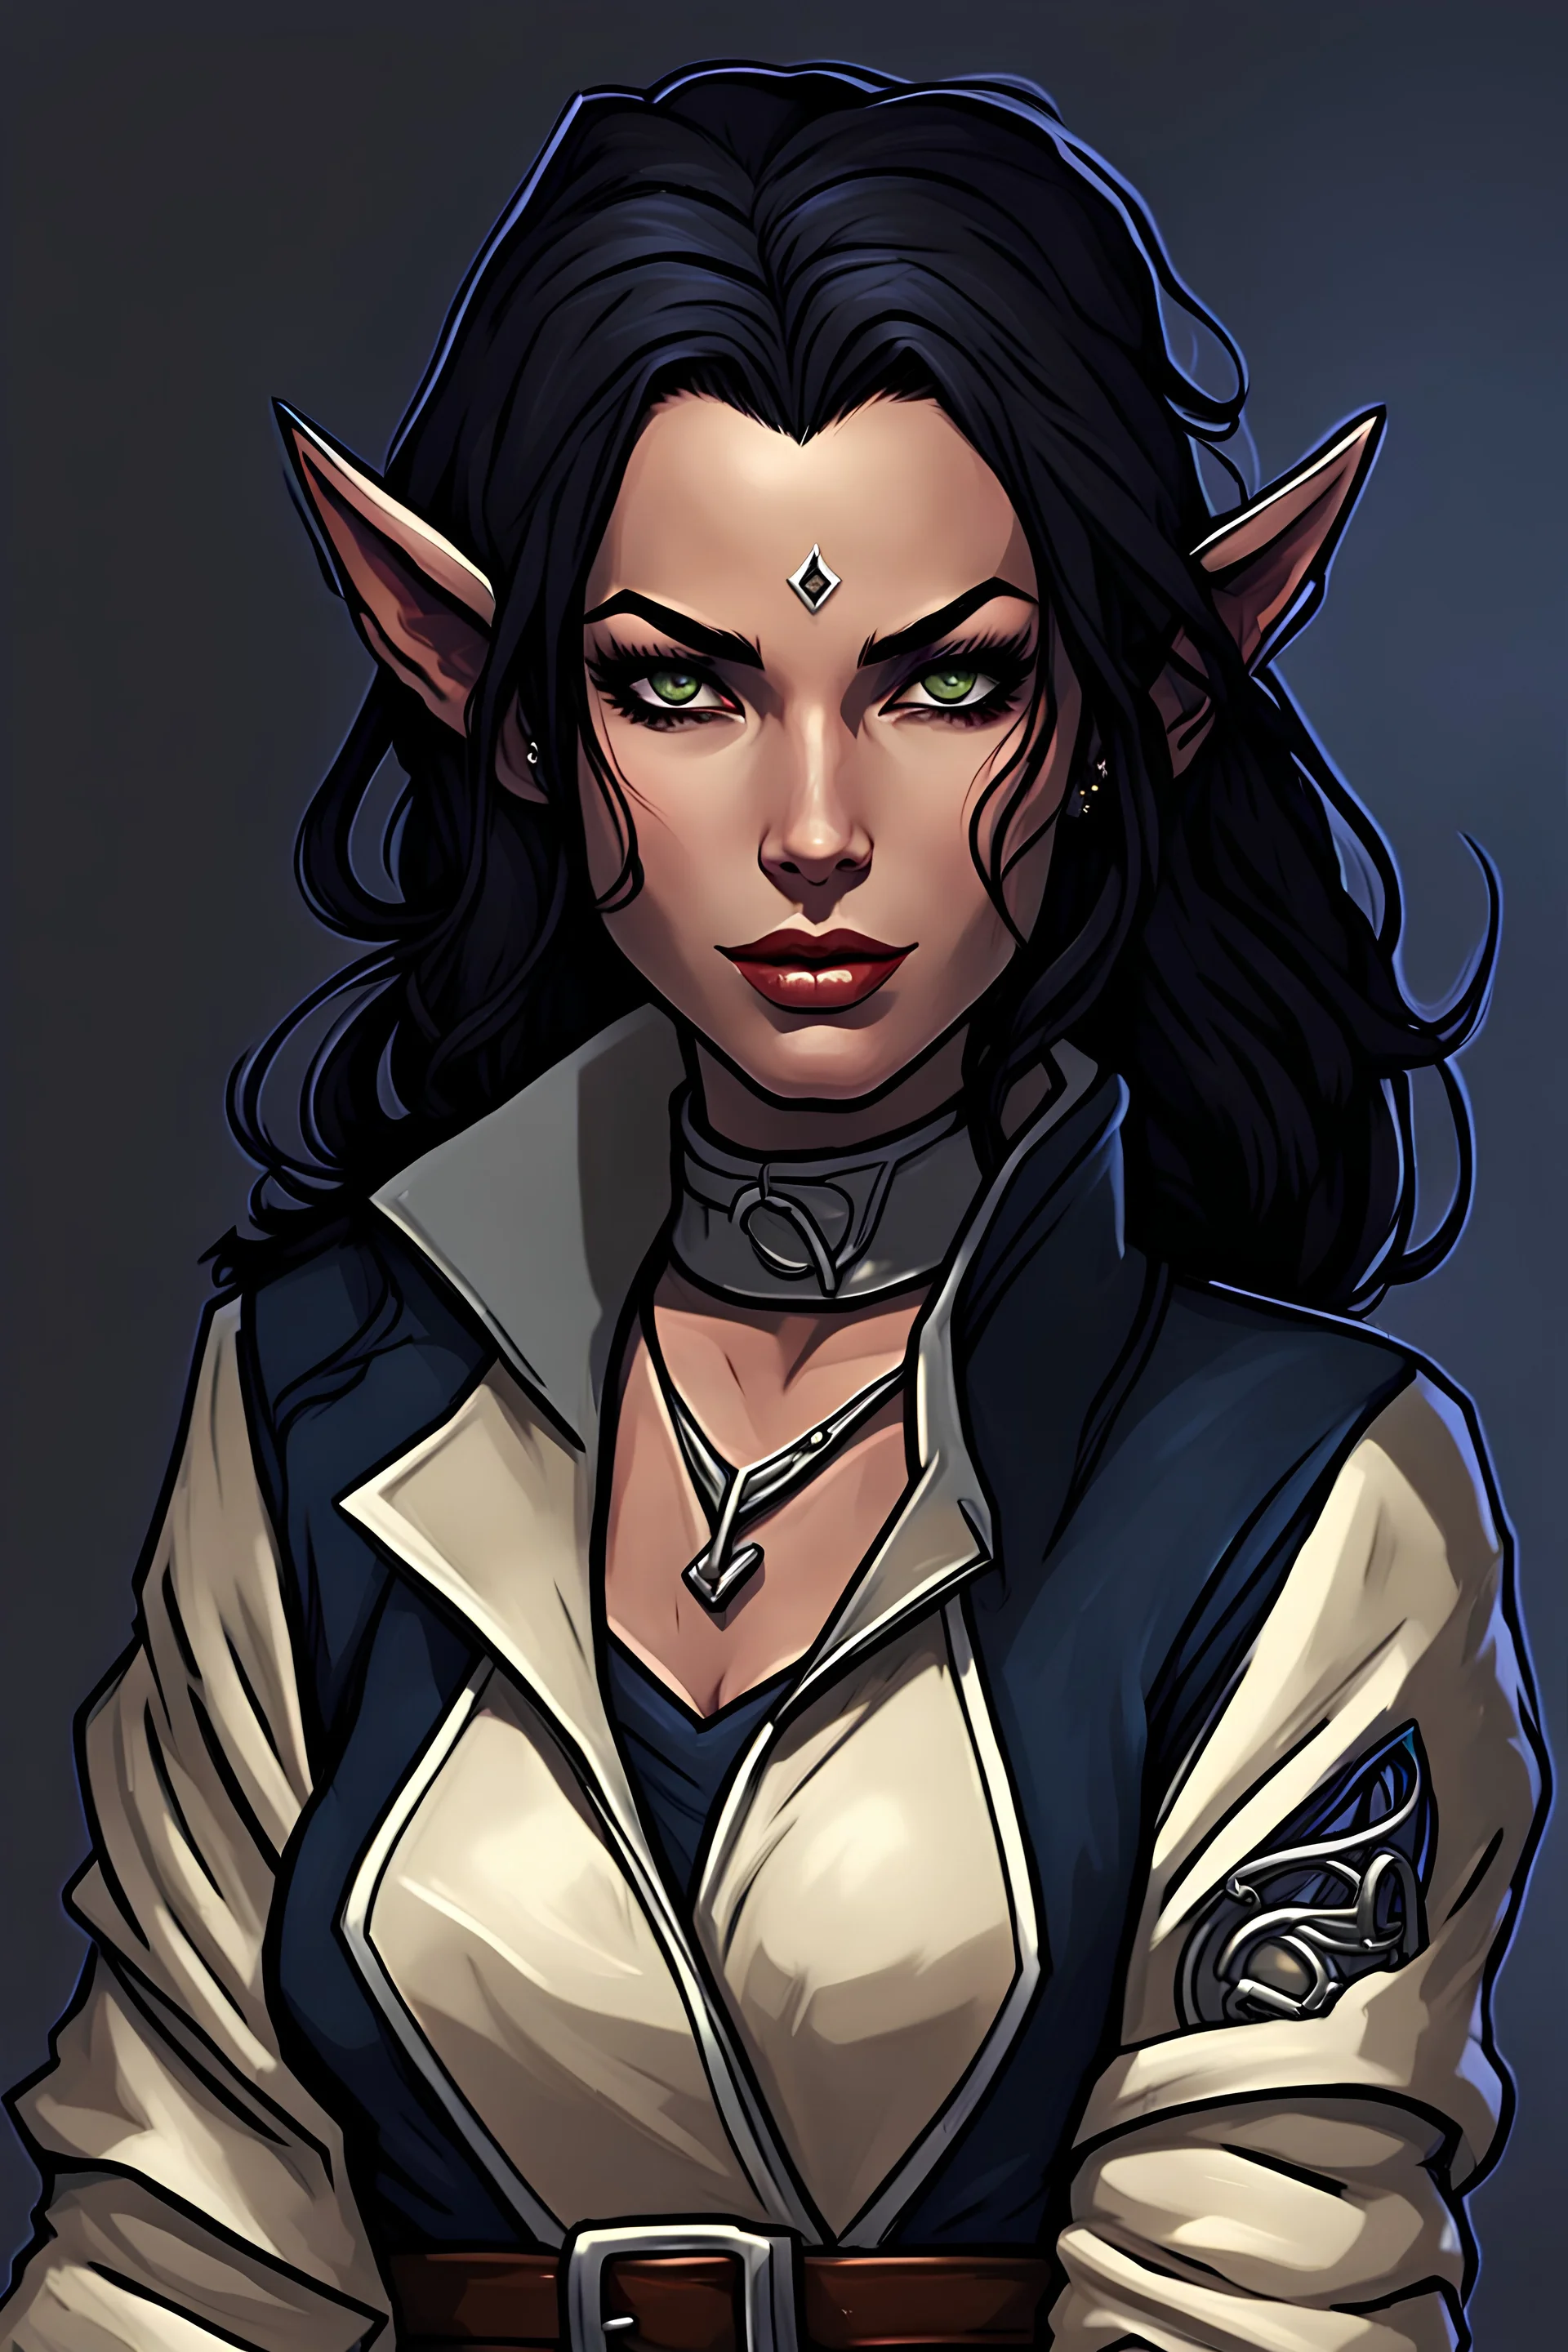 female tiefling rogue with shoulder length dark hair. The dark hair contrasted and complimented her soft facial features. Below her left eye there is a tattoo of fine lined design that looks like a solid line. She had a fashionable yet practical jacket of a midnight blue overtop a silver steel chest plate and underneath it all a modern cut of mage robes the color of cream with ornate blue edging.